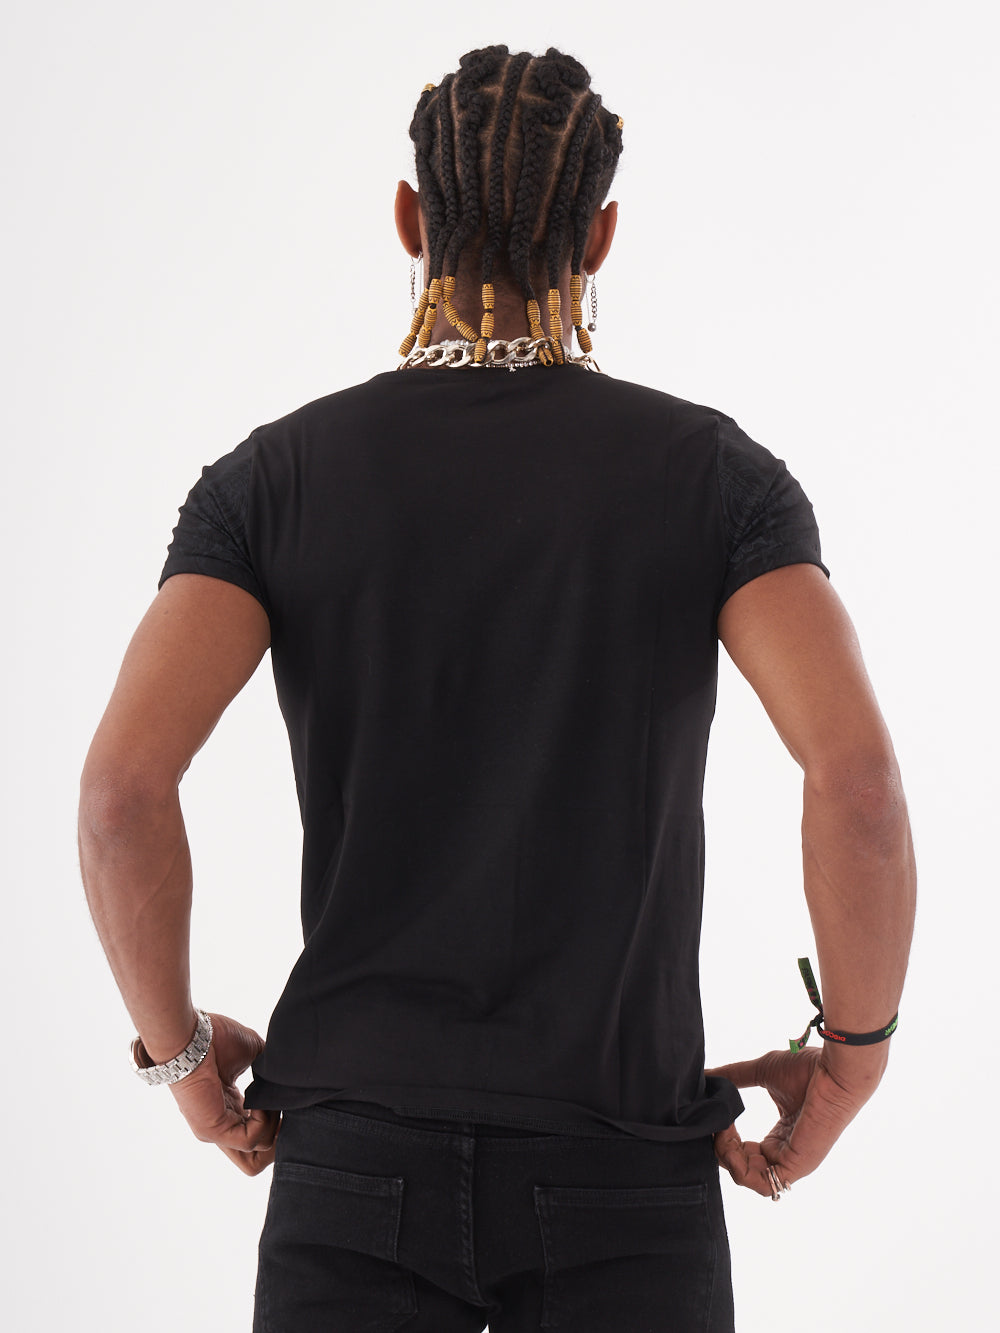 The back of a man wearing a TRINITY T-SHIRT | BLACK tee.